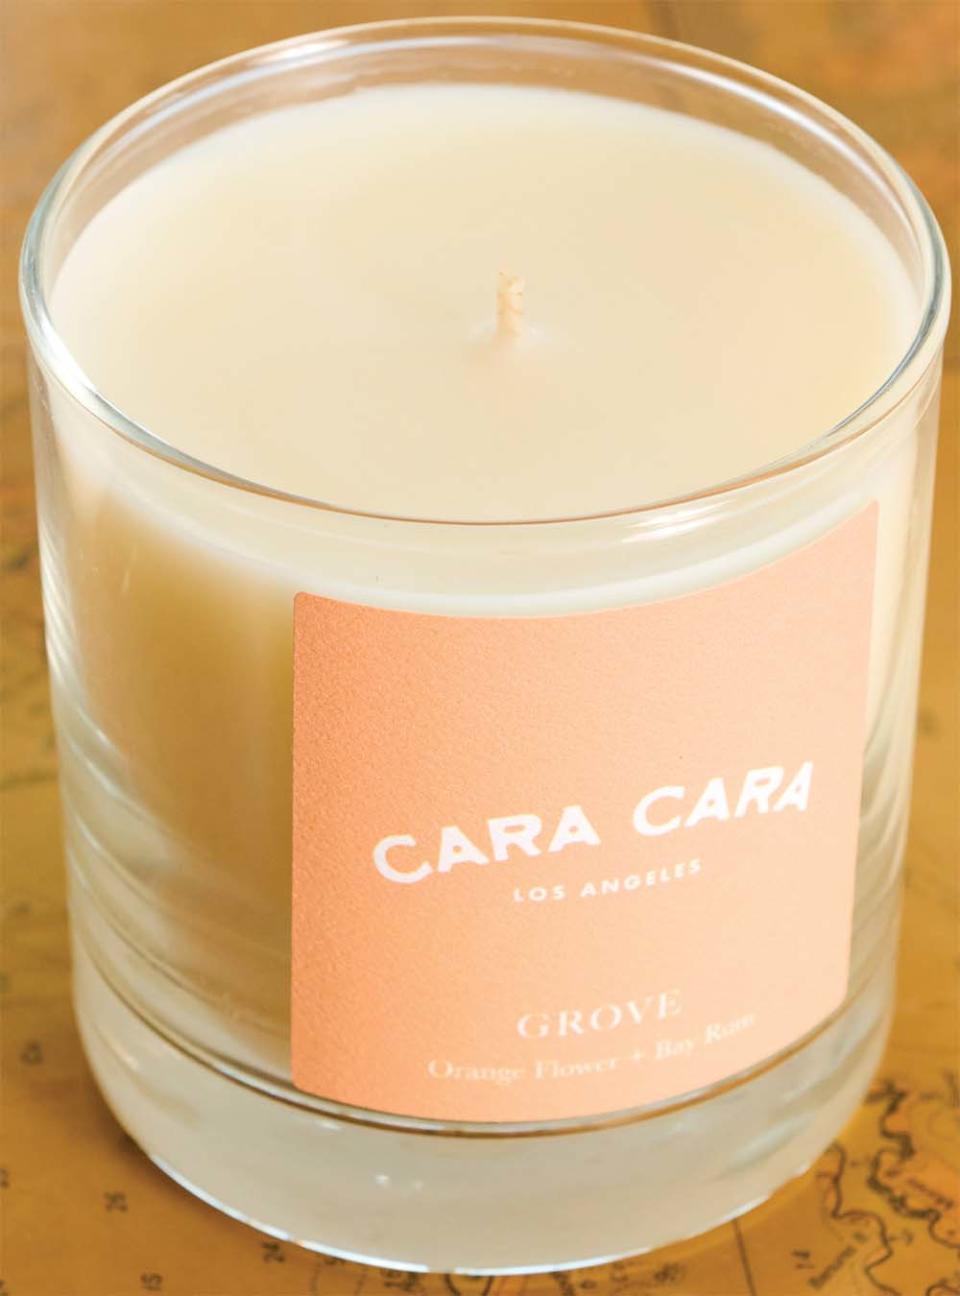 A candle by Rou’s Cara Cara Los Angeles, a sustainable dried flower and gifting brand.